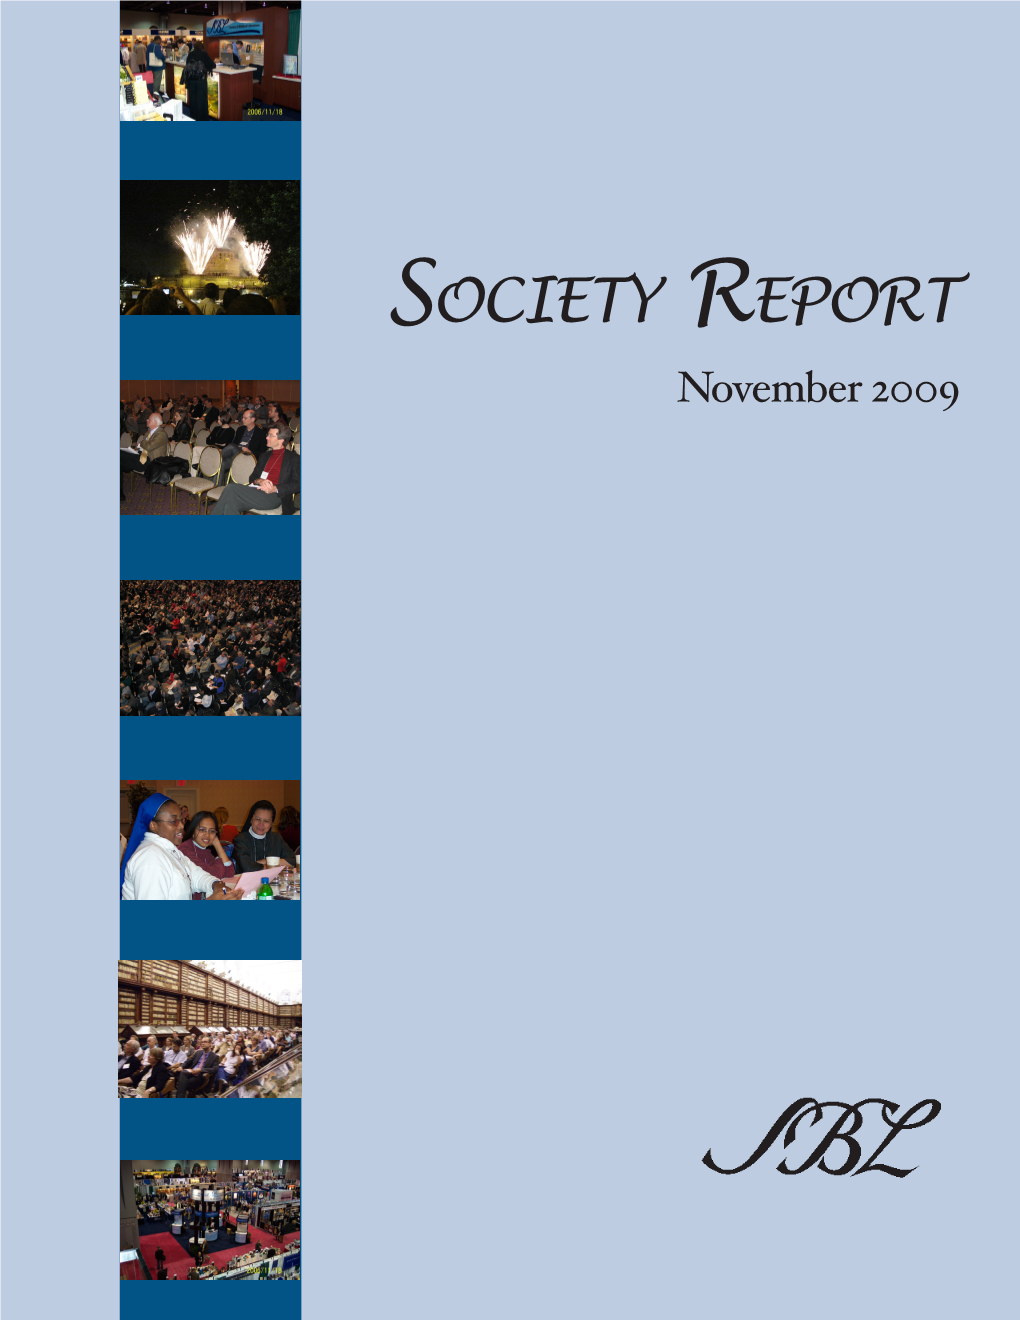 Society Report November 2009 from the Executive Director